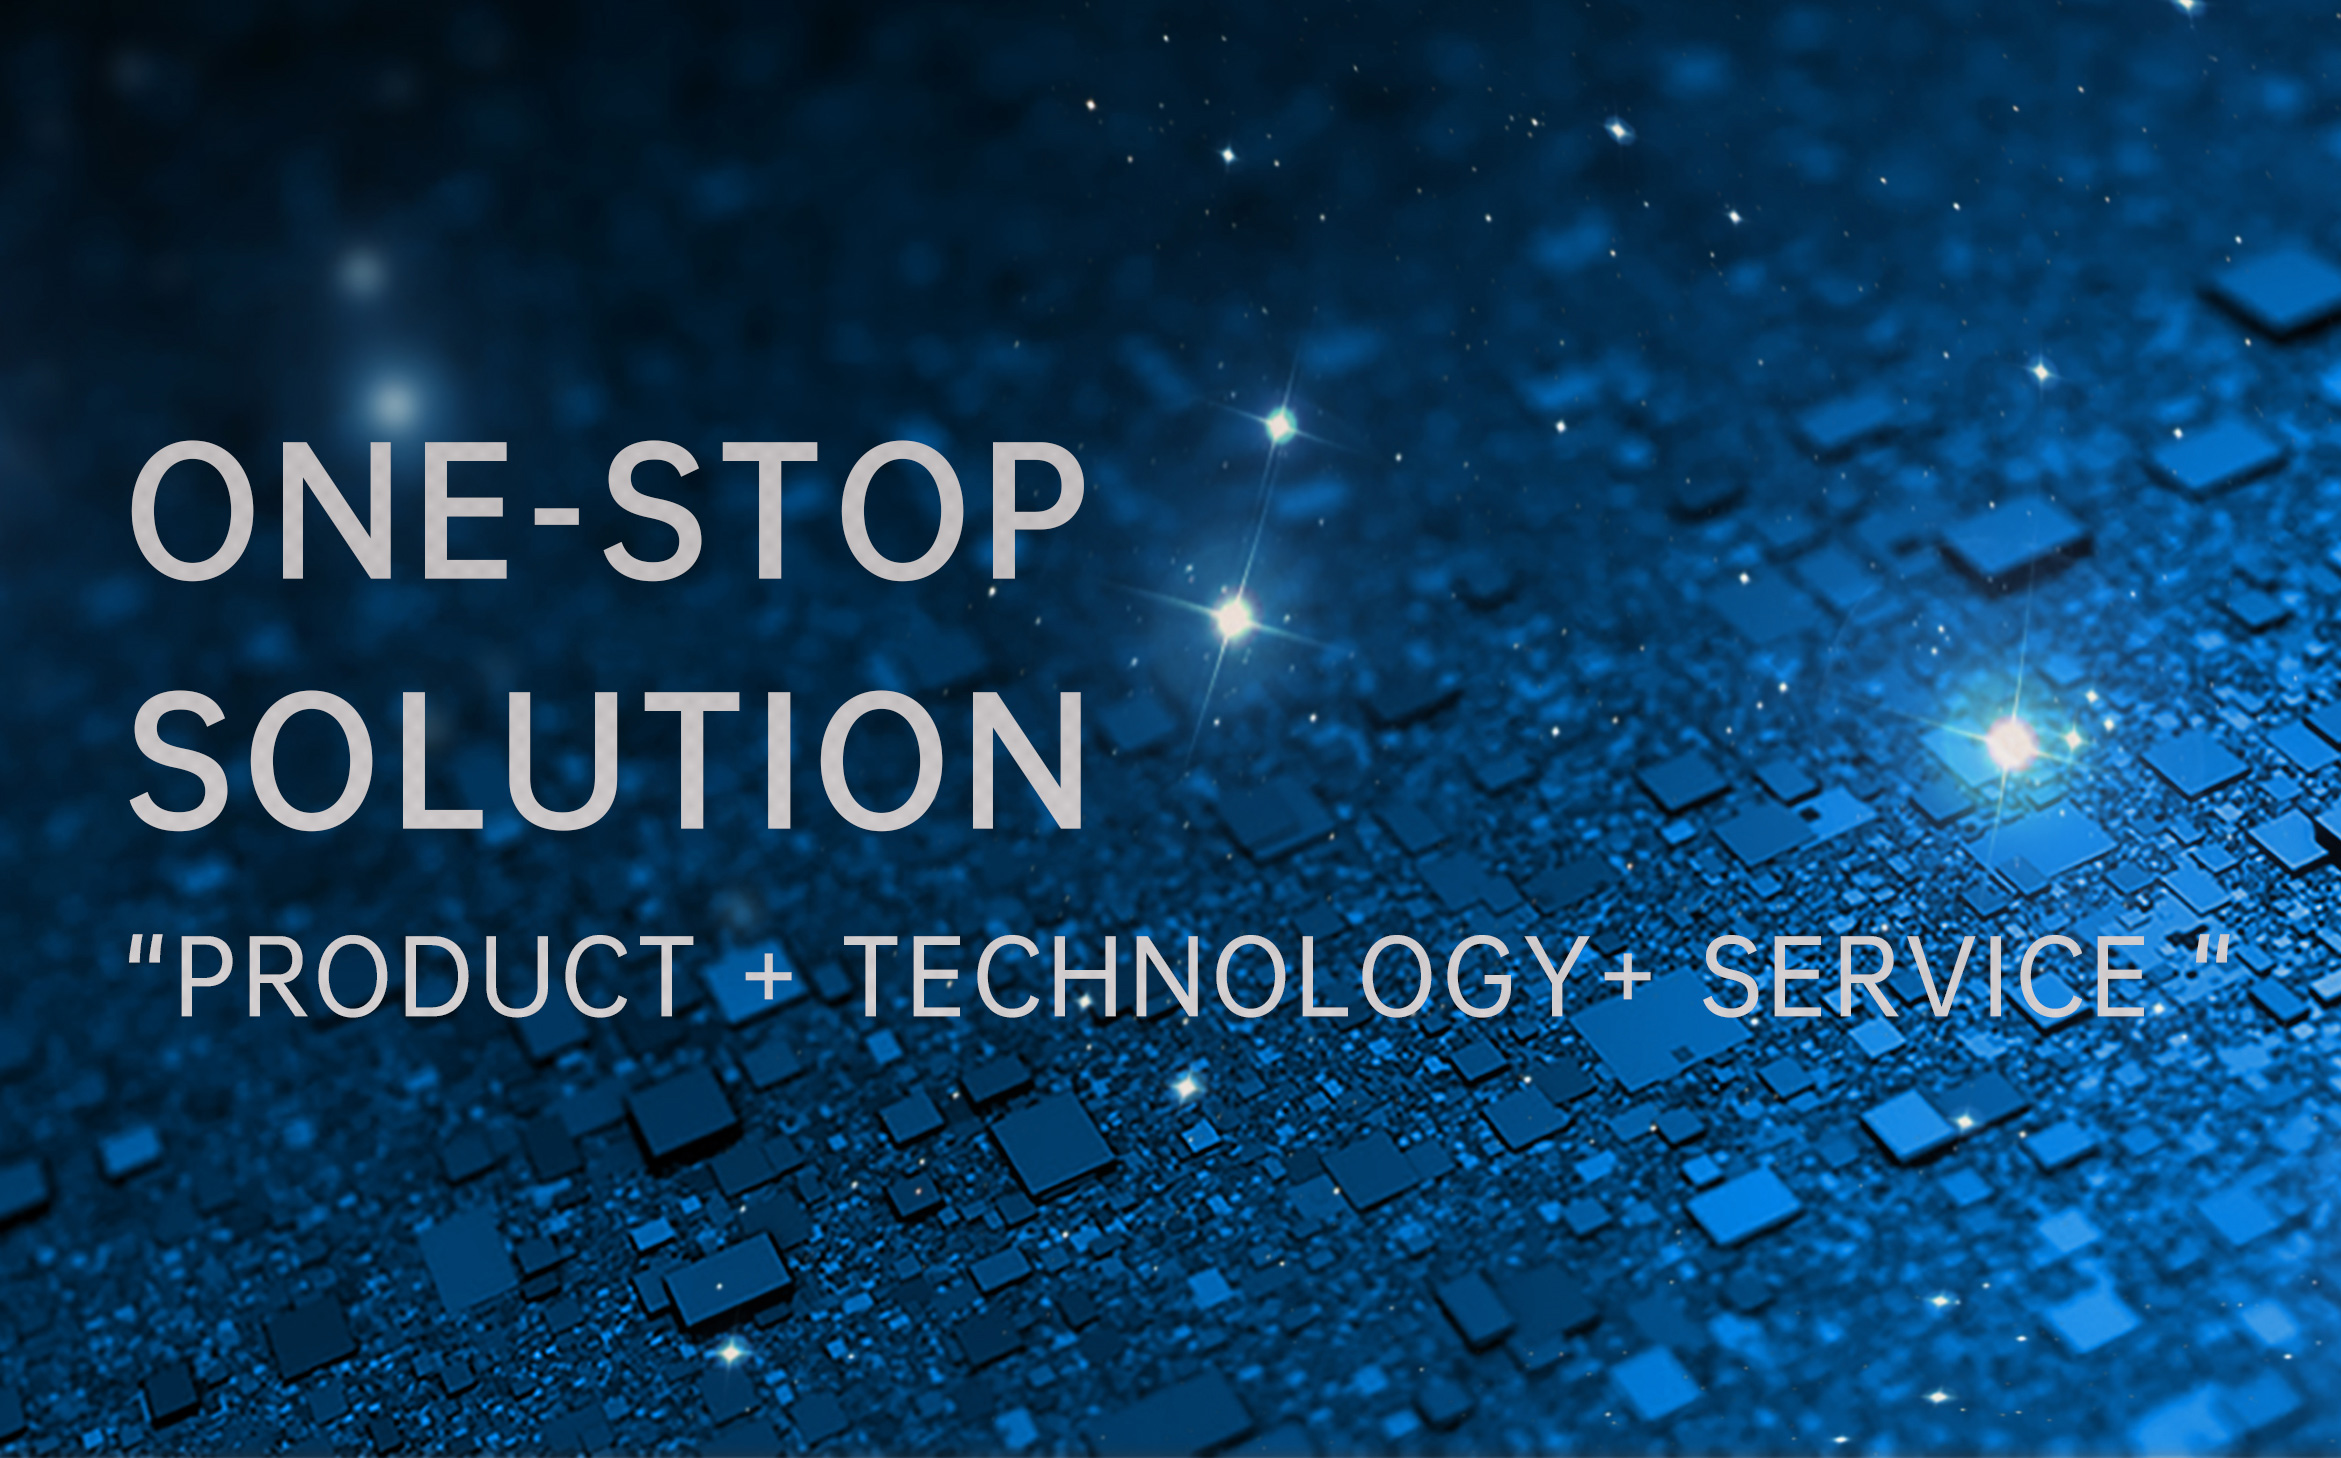 One-stop Solutions